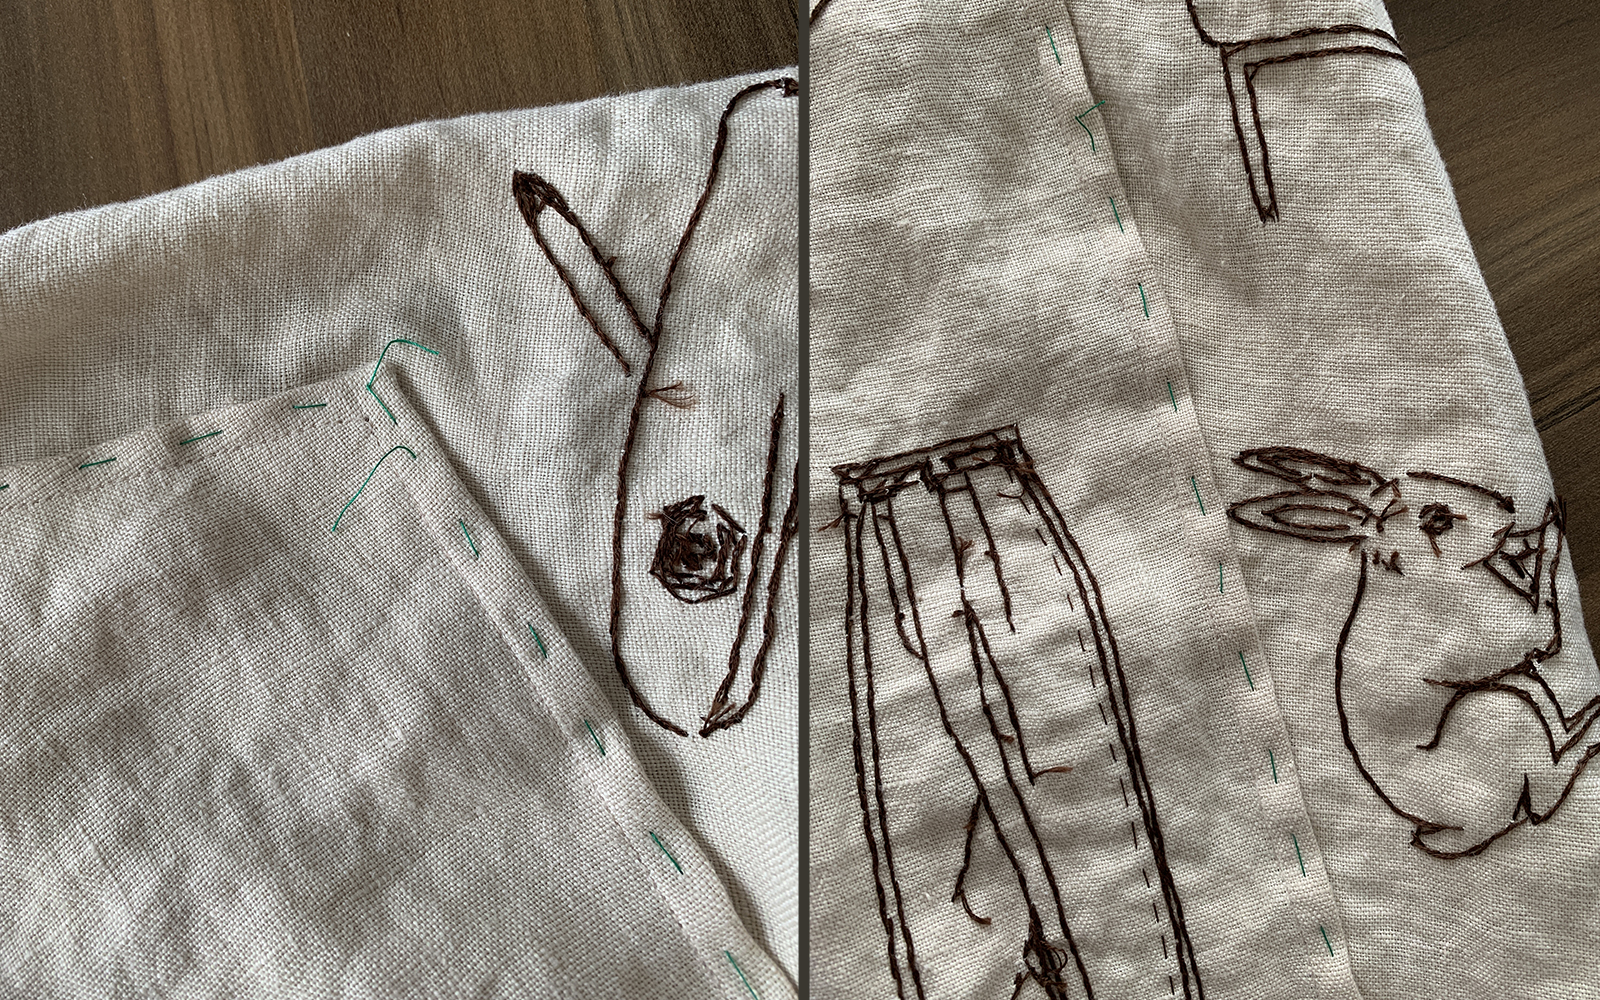 Hand Embroidering a T-shirt - The Inspired Sewist